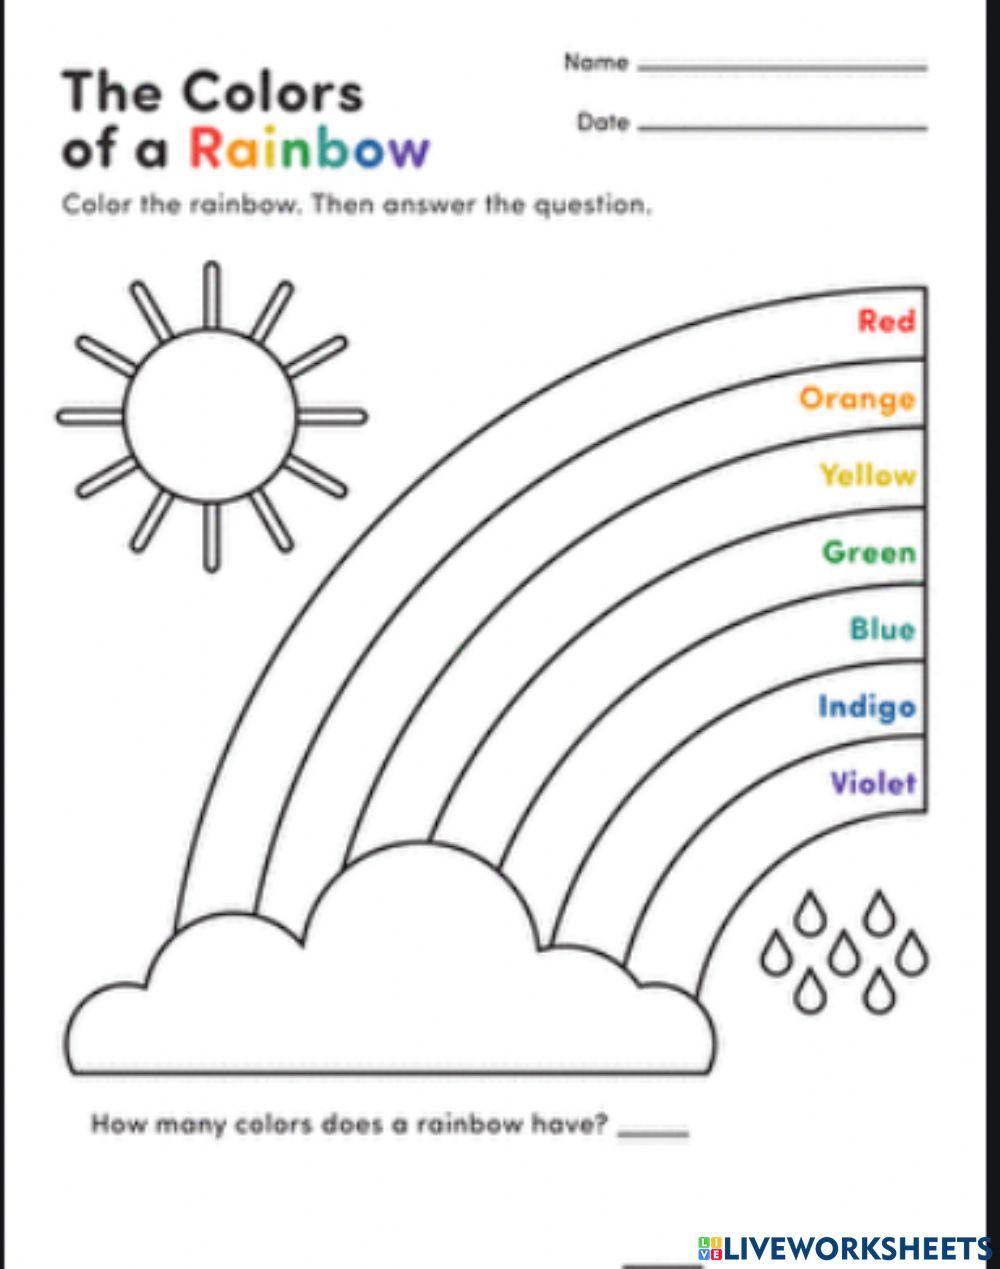 How much colors do rainbows have?